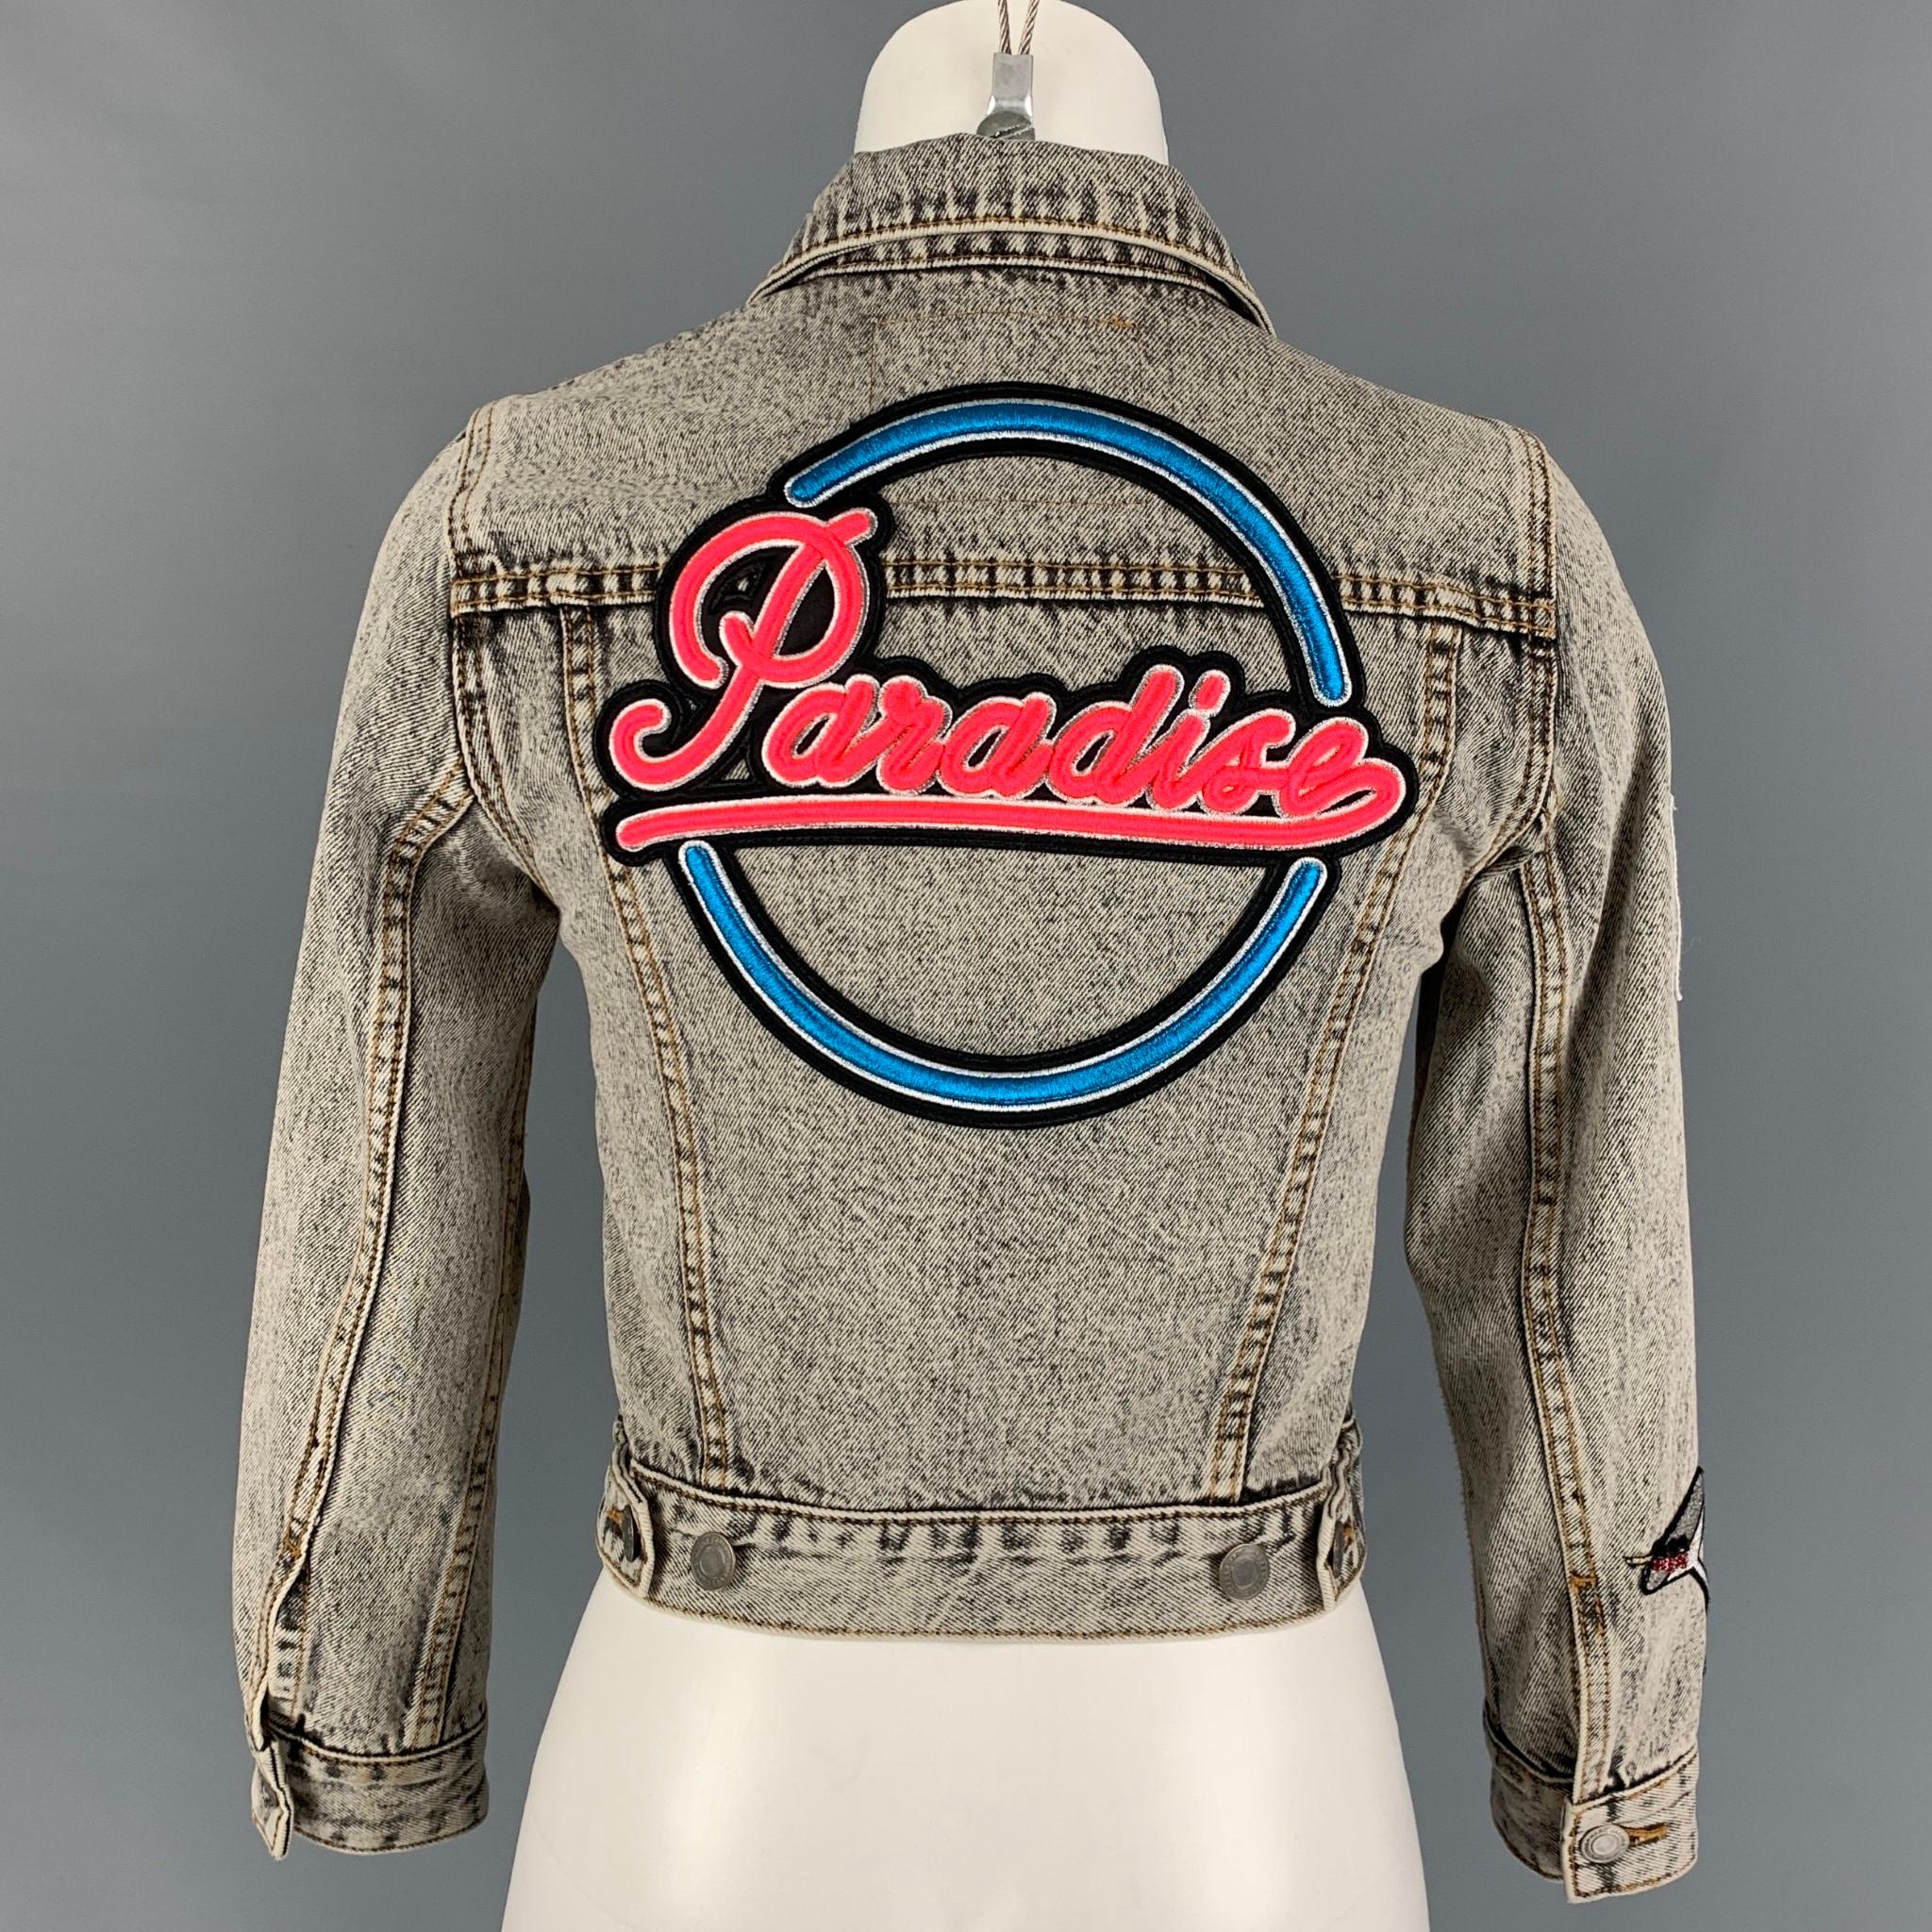 denim jacket with pins and patches